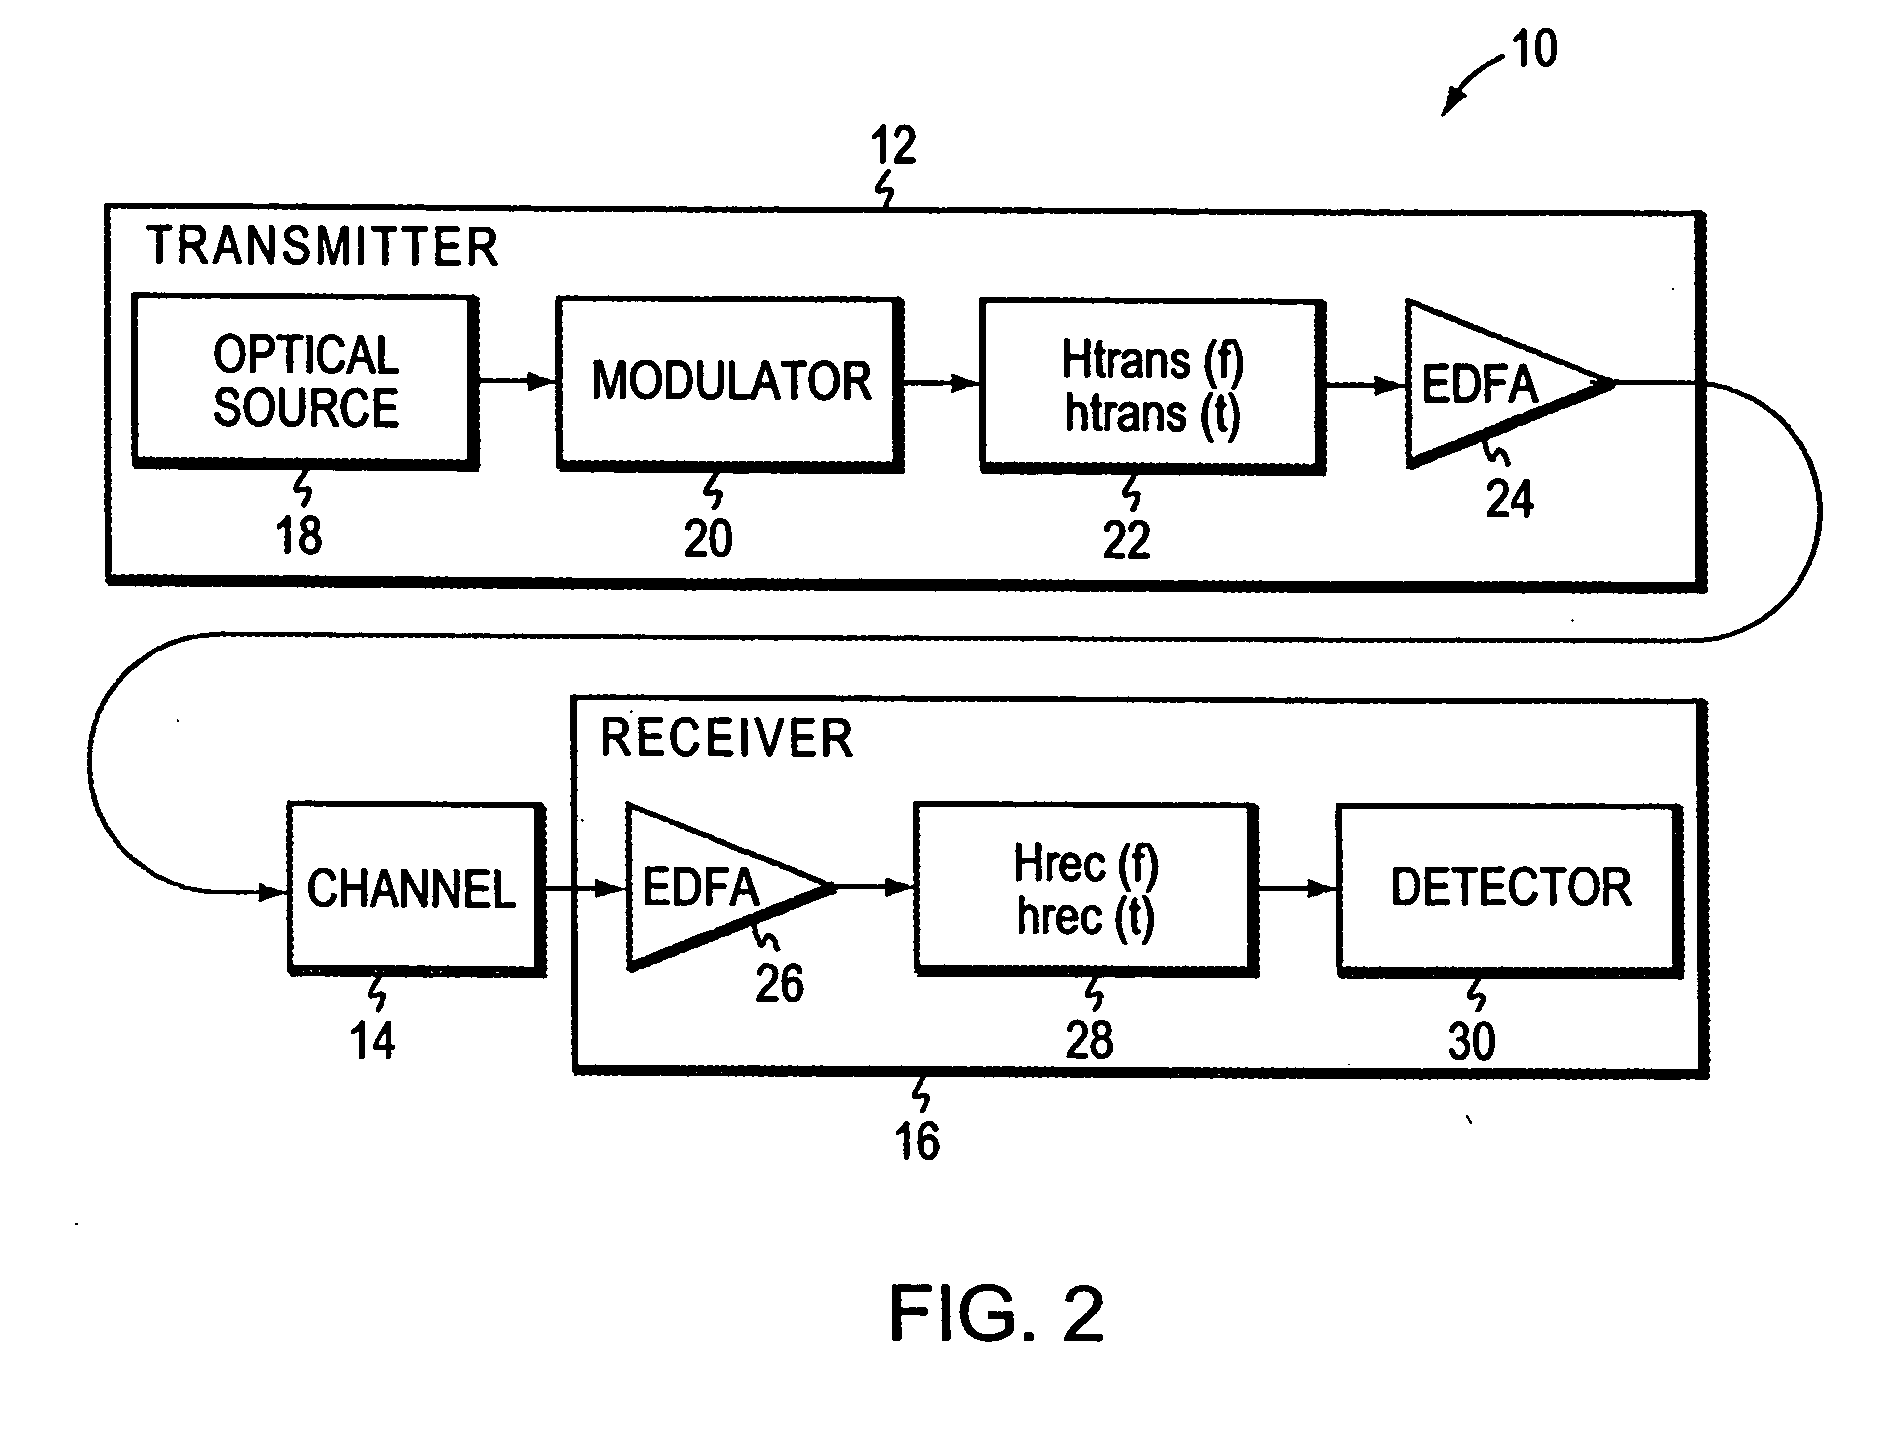 Variable-rate communication system with optimal filtering